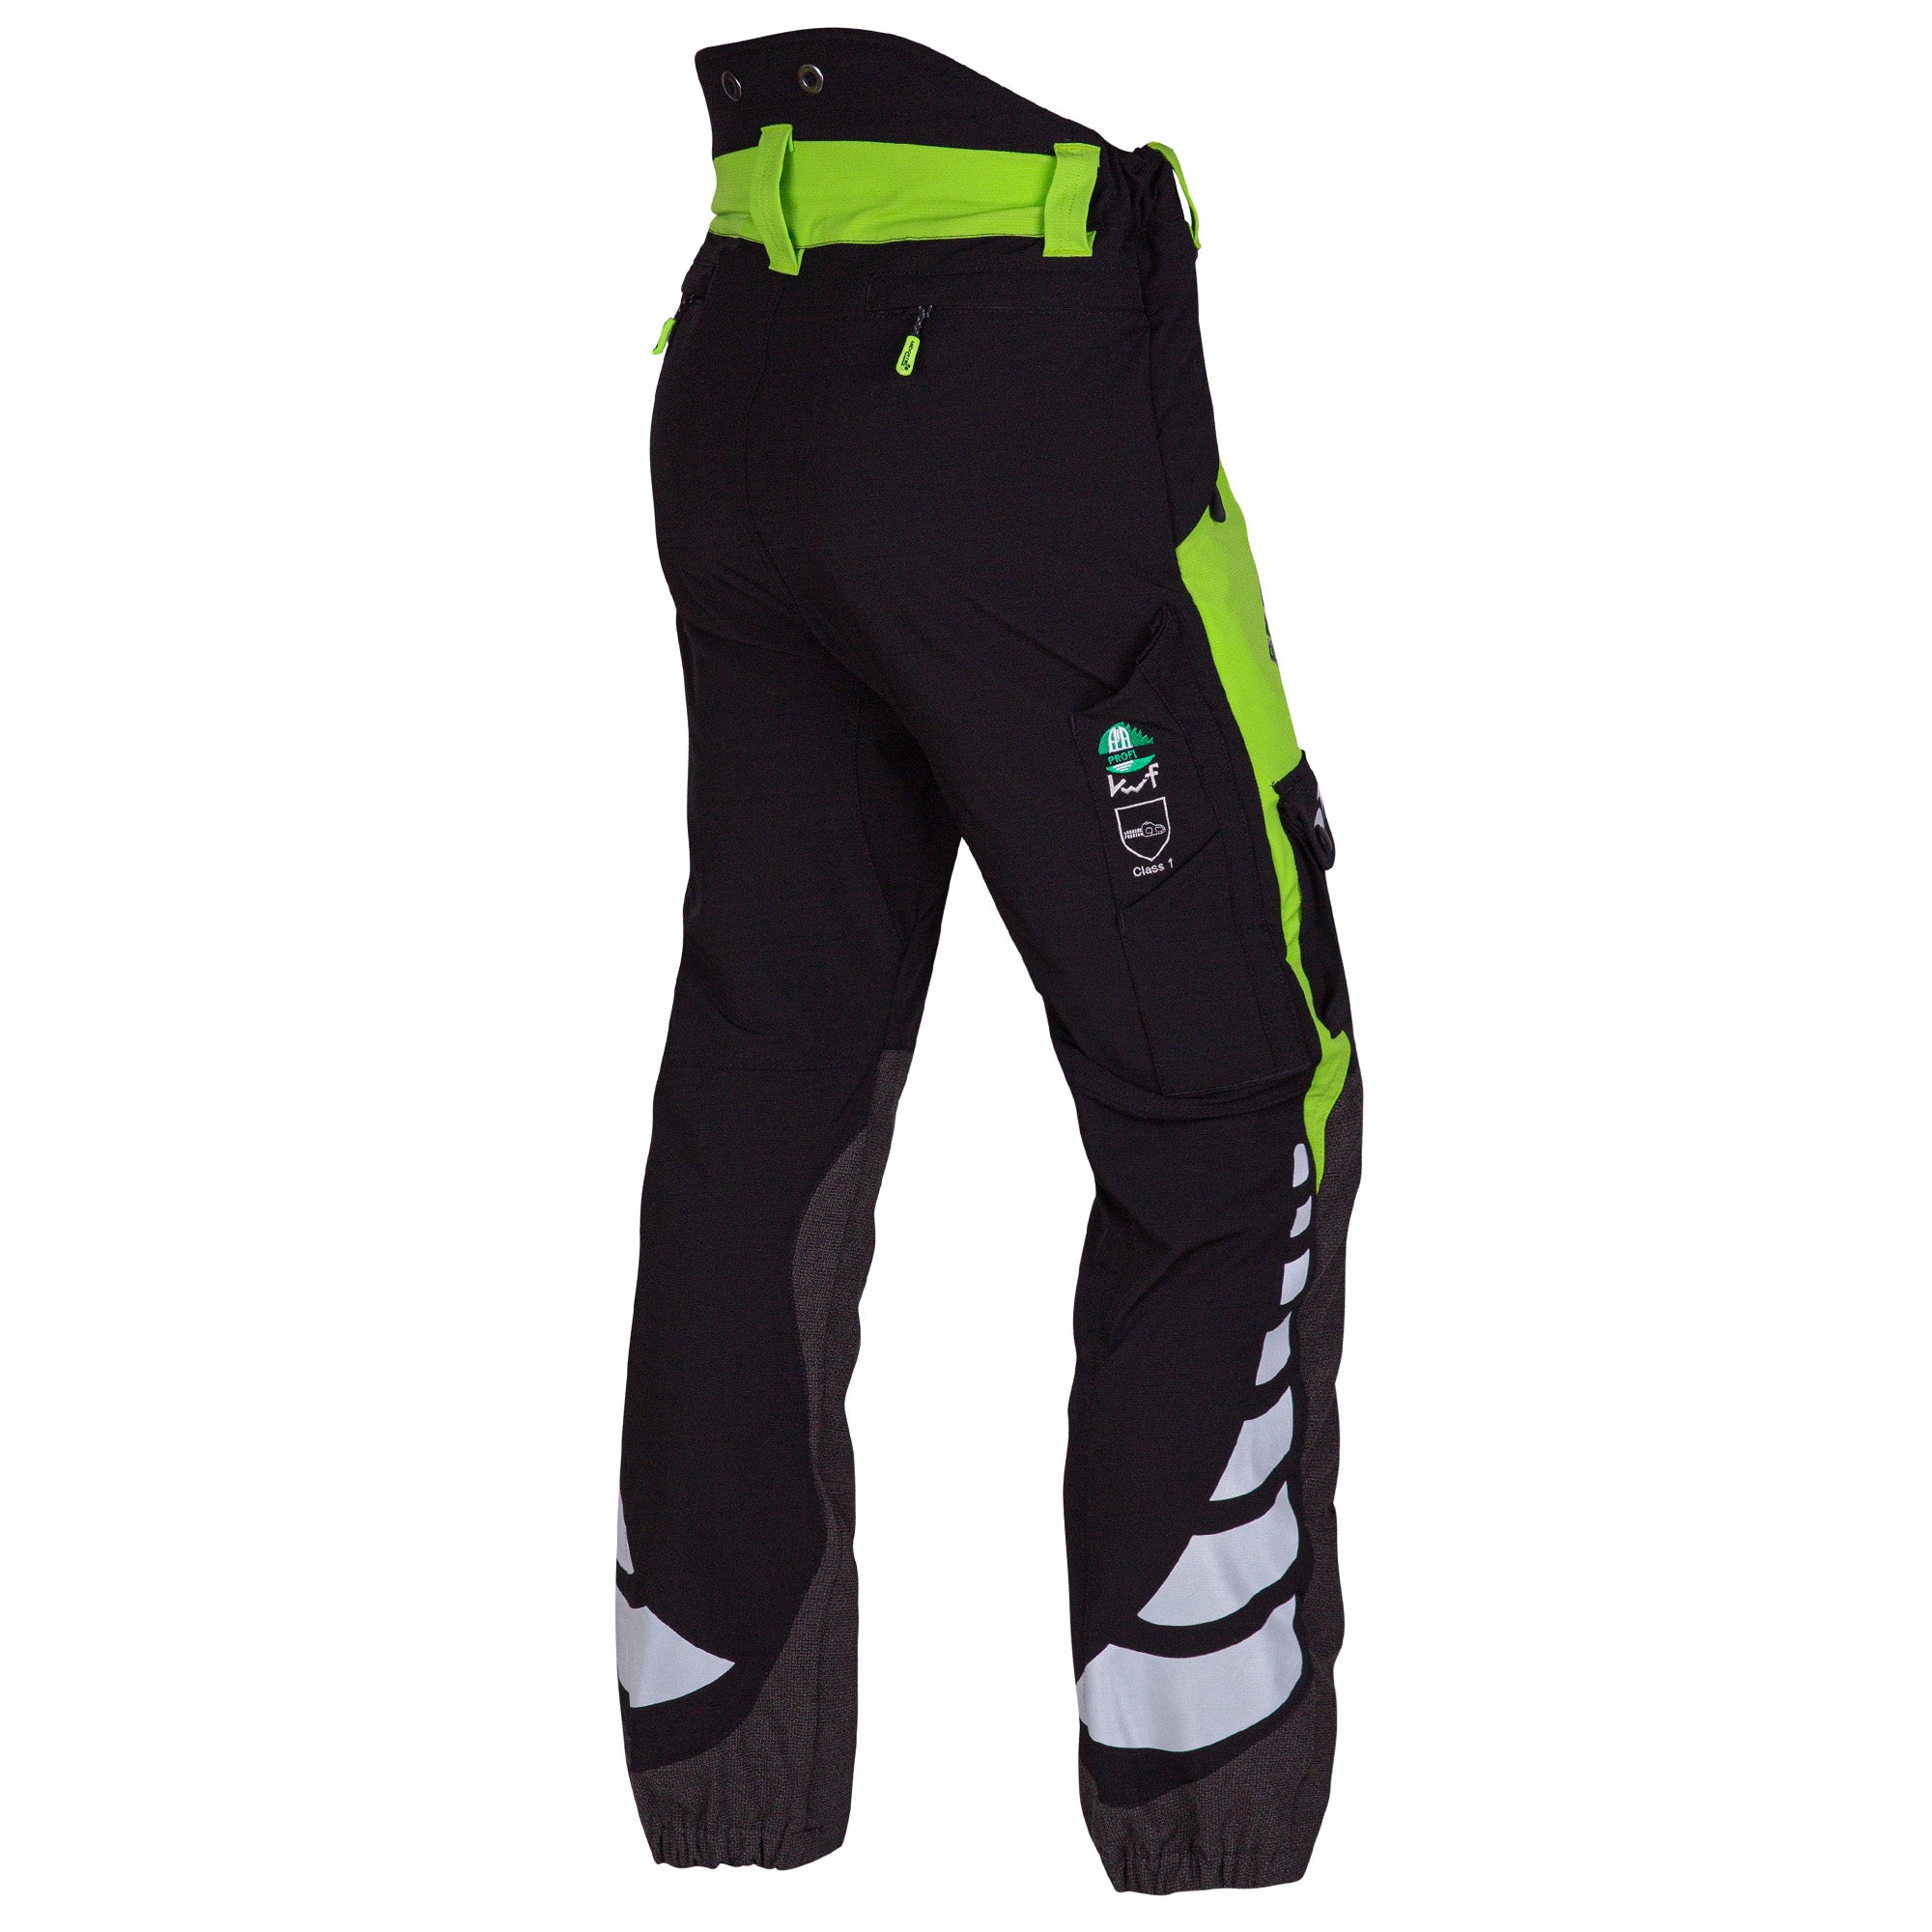 AT4010/AT4020/AT4030 Breatheflex Chainsaw Trousers Design A Class 1/2/3 - Lime.